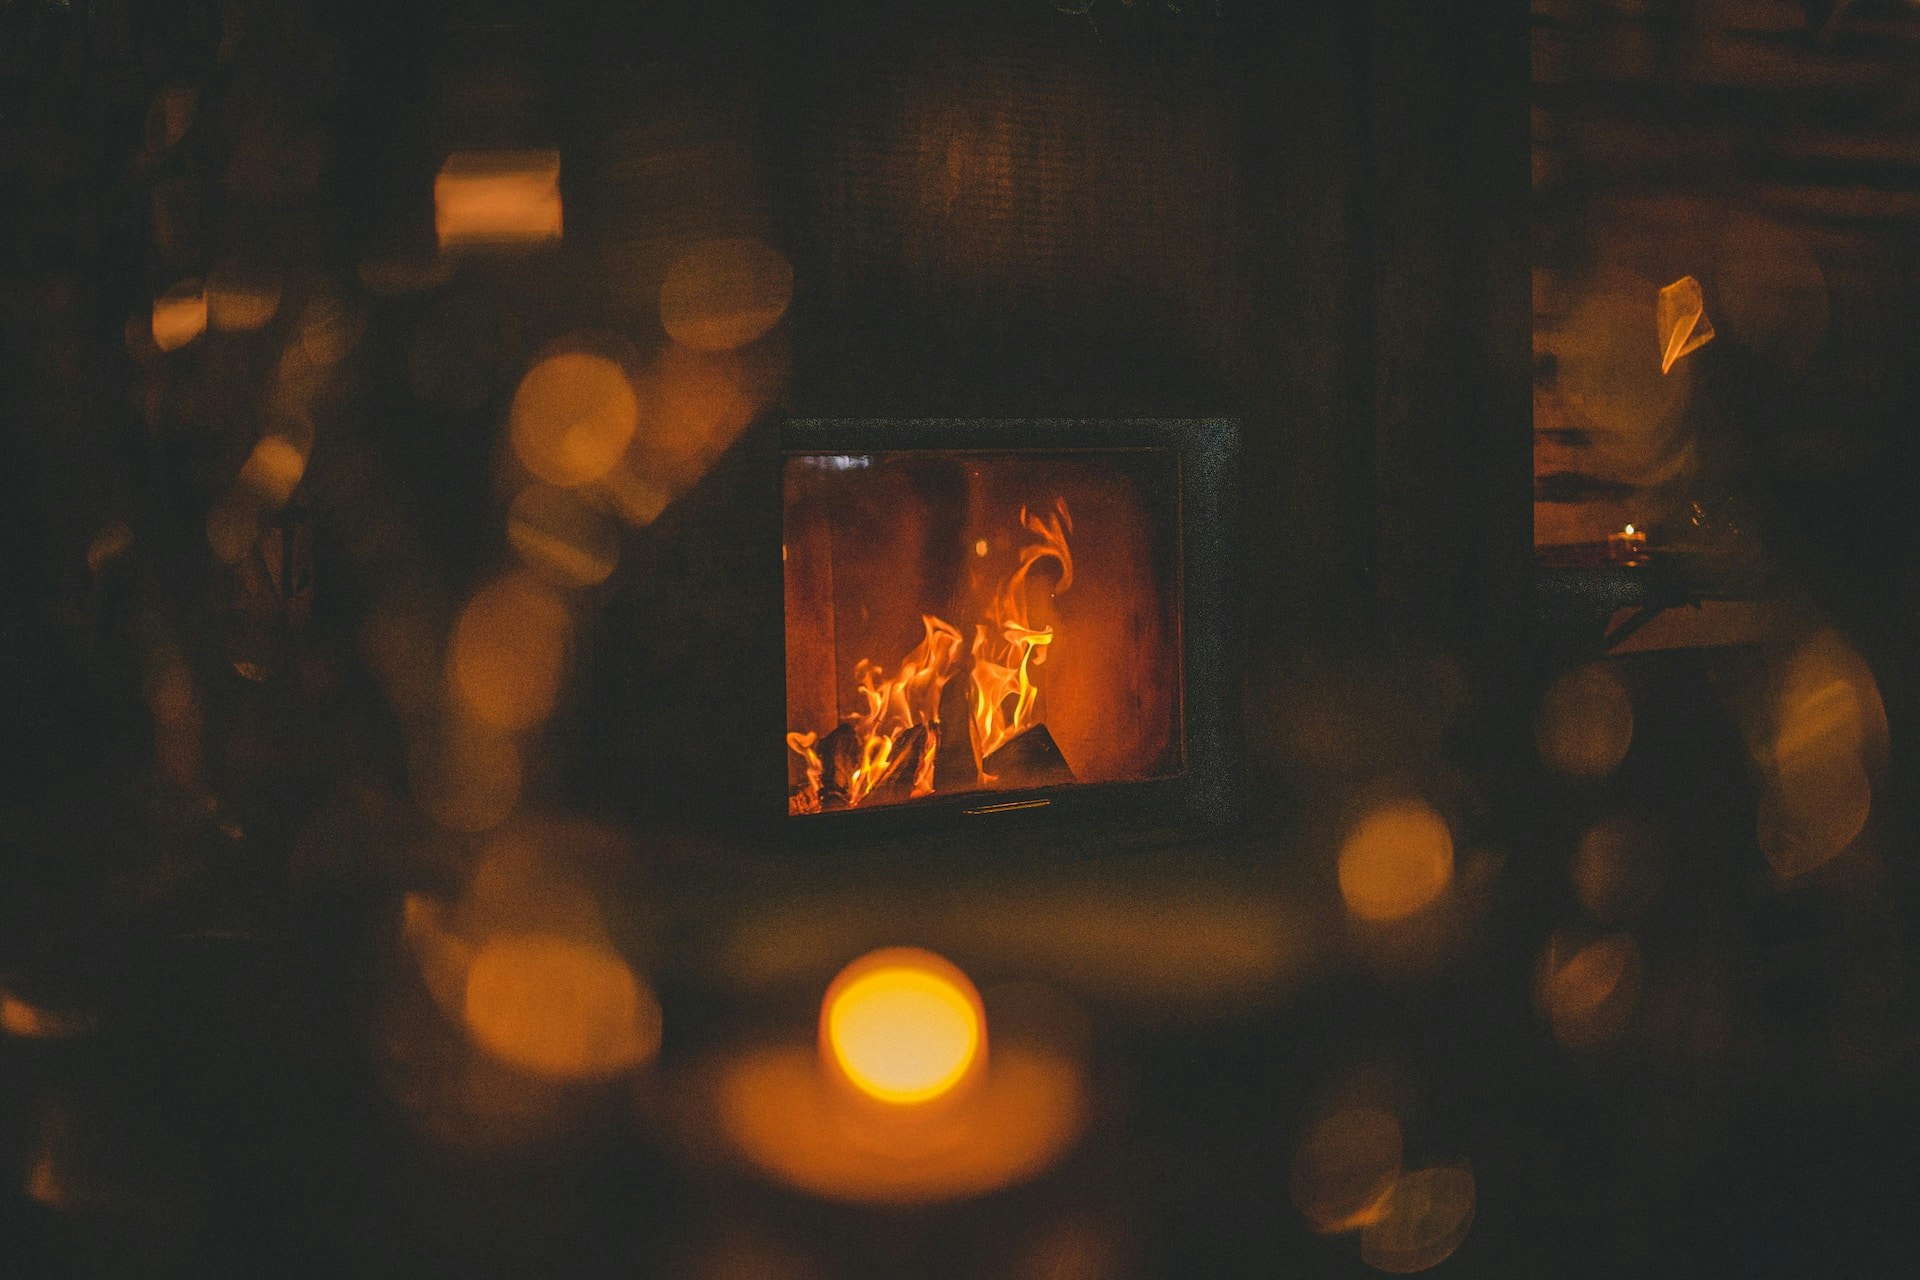 Cinematic fireplace shot with blurred embers